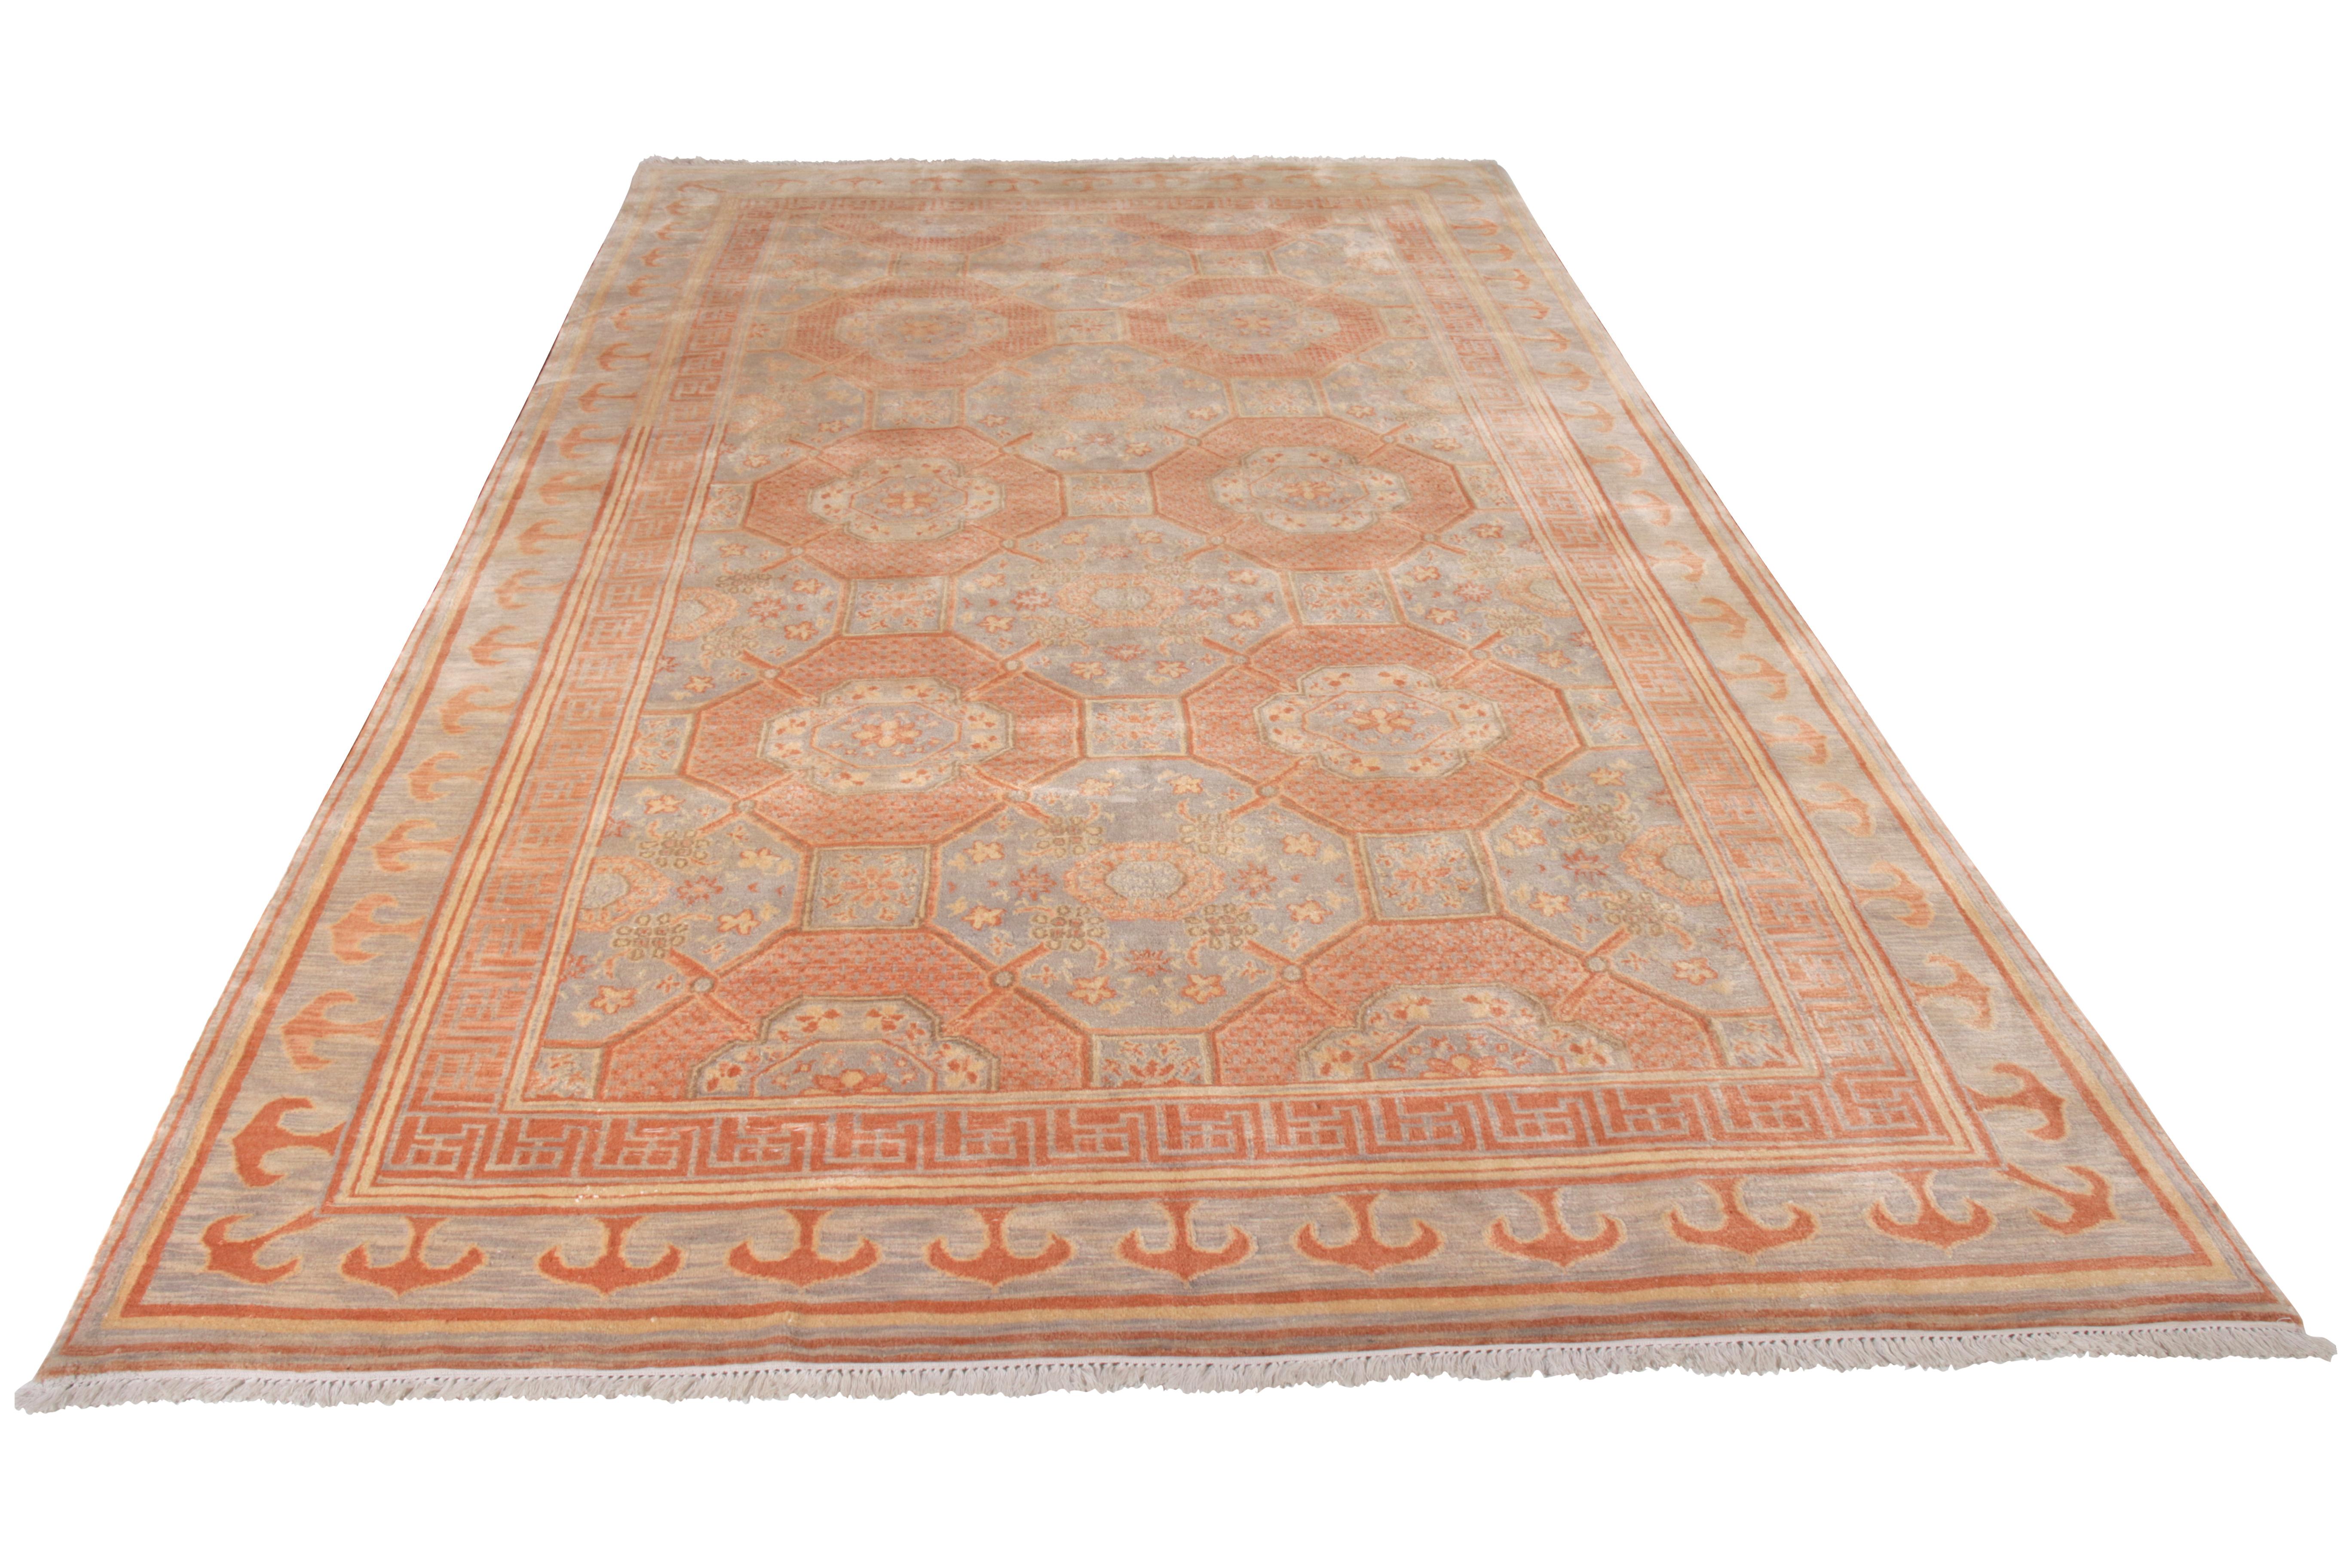 An 8x12 ode to venerated Khotan rug styles in blue and orange, joining the Modern Classics Collection by Rug & Kilim. Hand-knotted in wool, marrying graceful geometric medallion and floral elements for a unique nod to this celebrated transitional